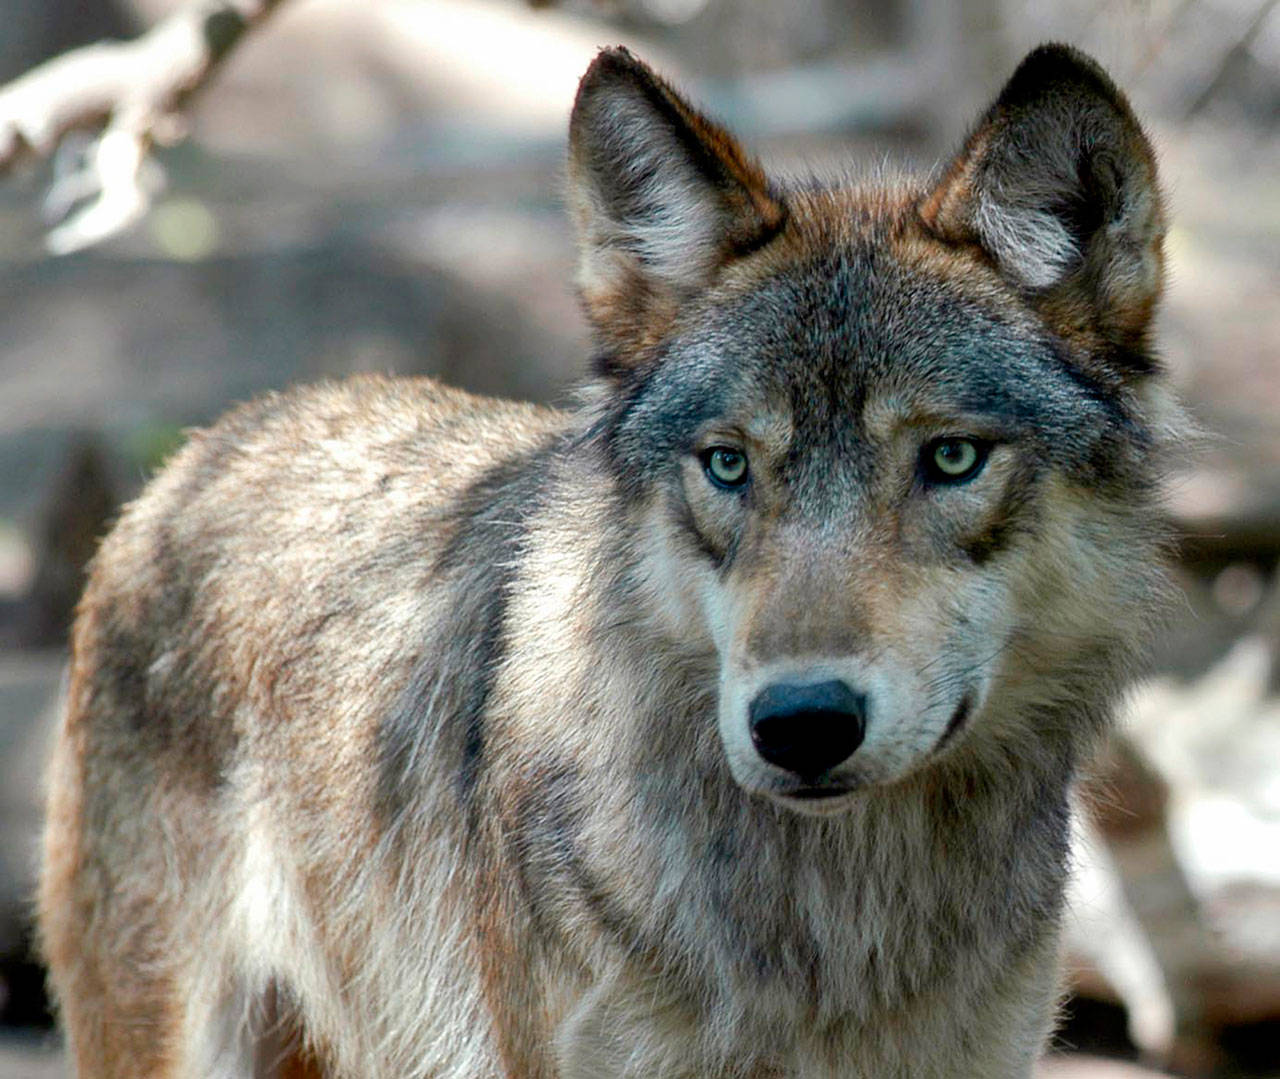 A gray wolf is seen at the Wildlife Science Center in Forest Lake, Minn., on July 16, 2004. The Republican-controlled House has passed a bill to drop legal protections for gray wolves across the lower 48 states, reopening a lengthy battle over the predator species. (Dawn Villella/The Associated Press)